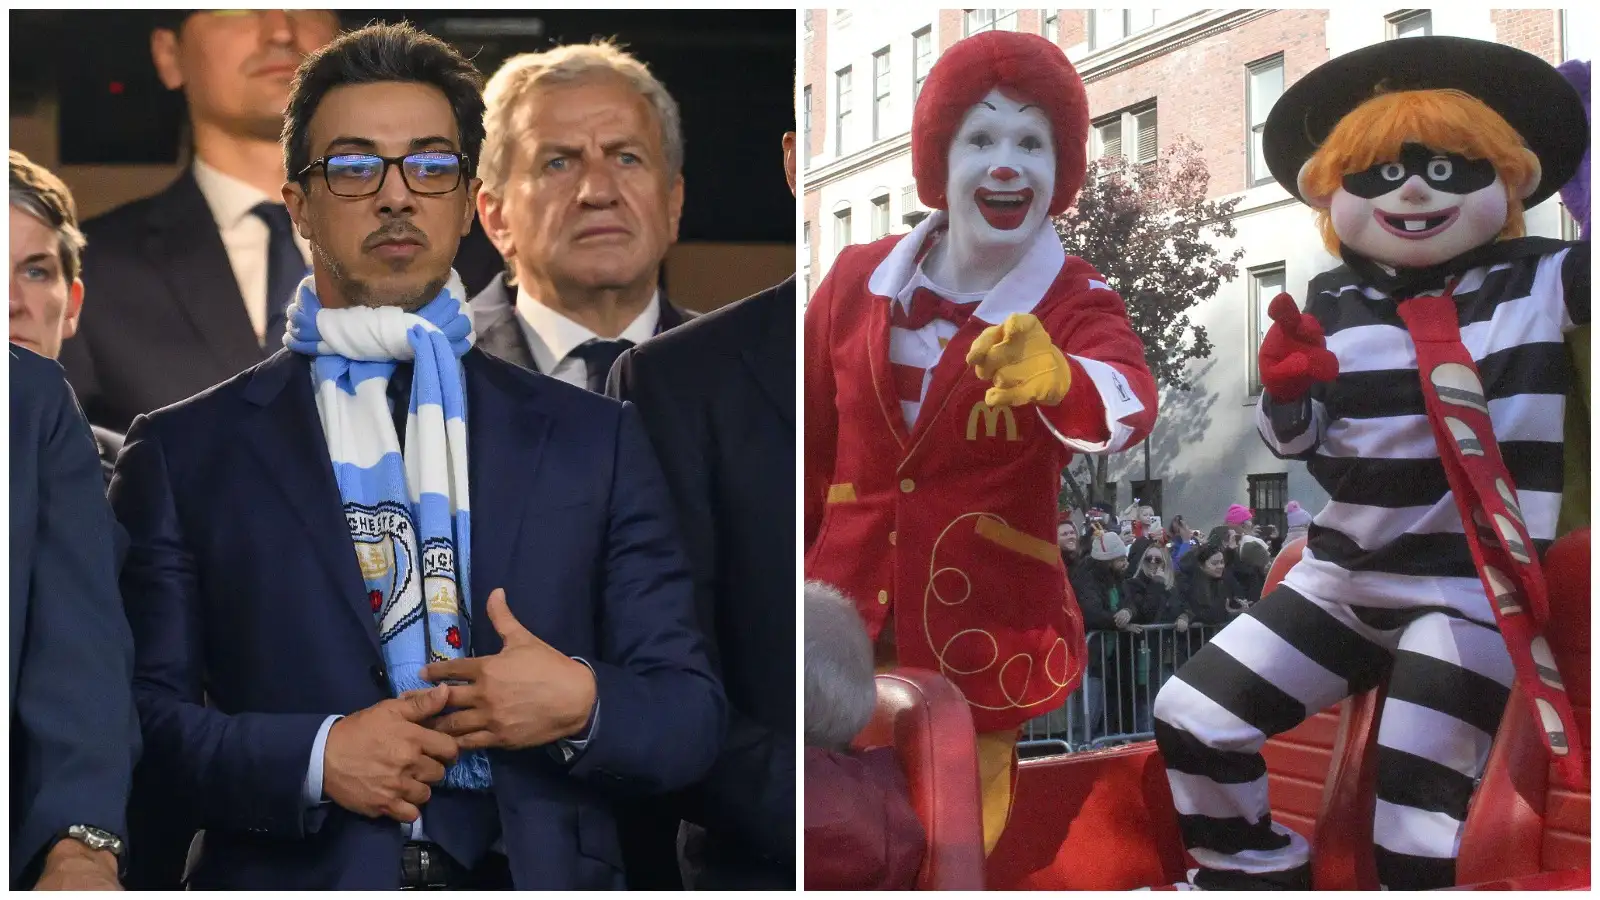 Manchester owner Sheikh Mansour and Ronald McDonald.